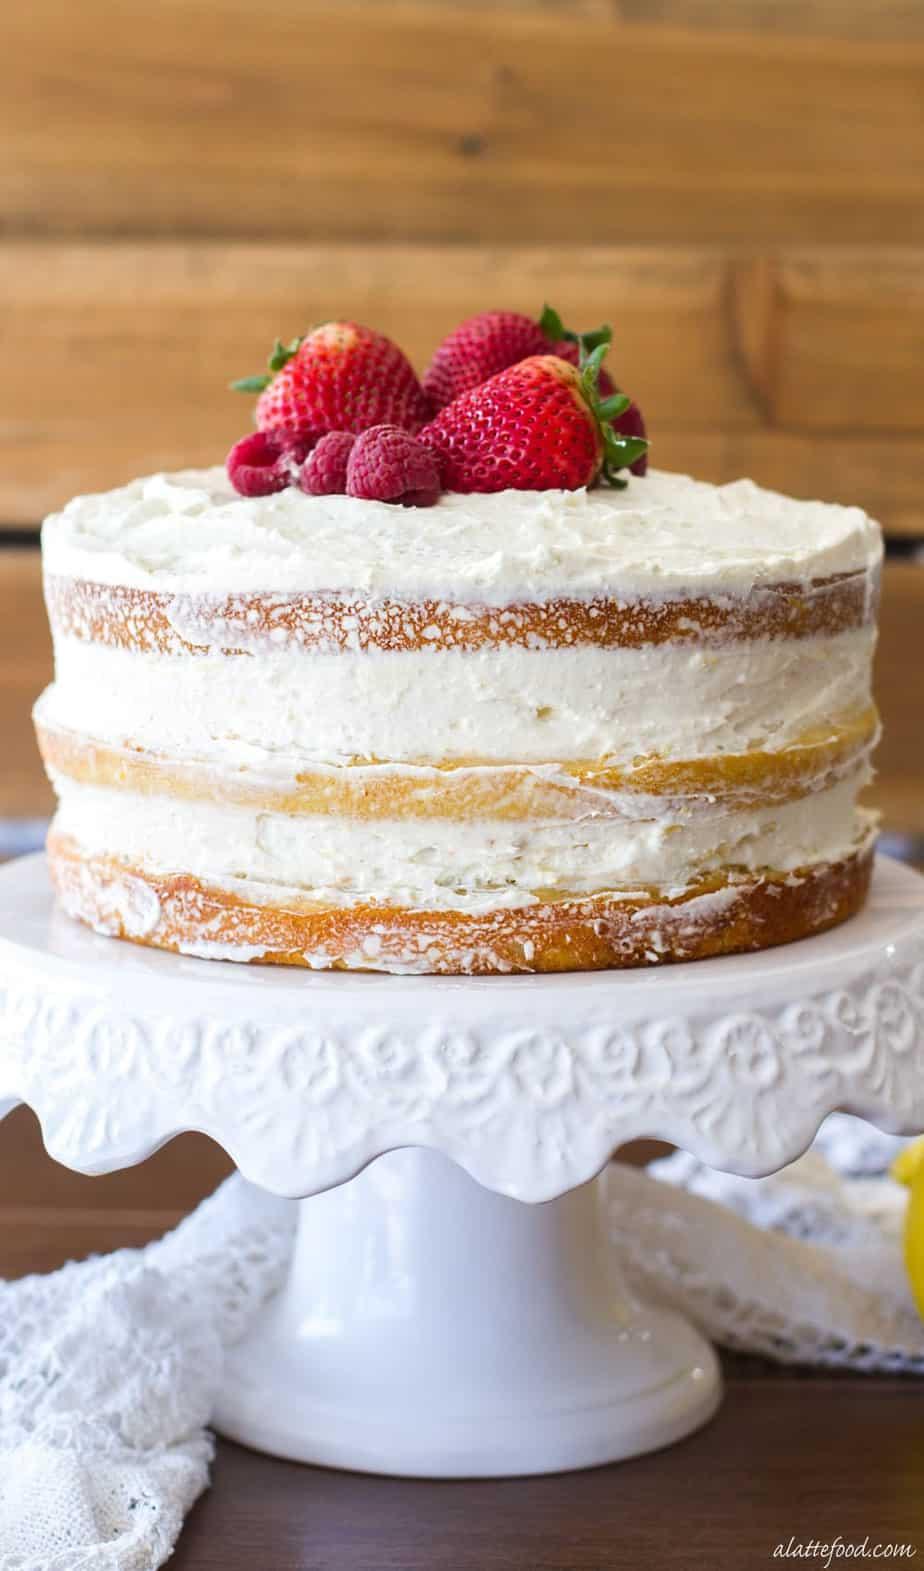 A layered vanilla cake topped with fresh berries.